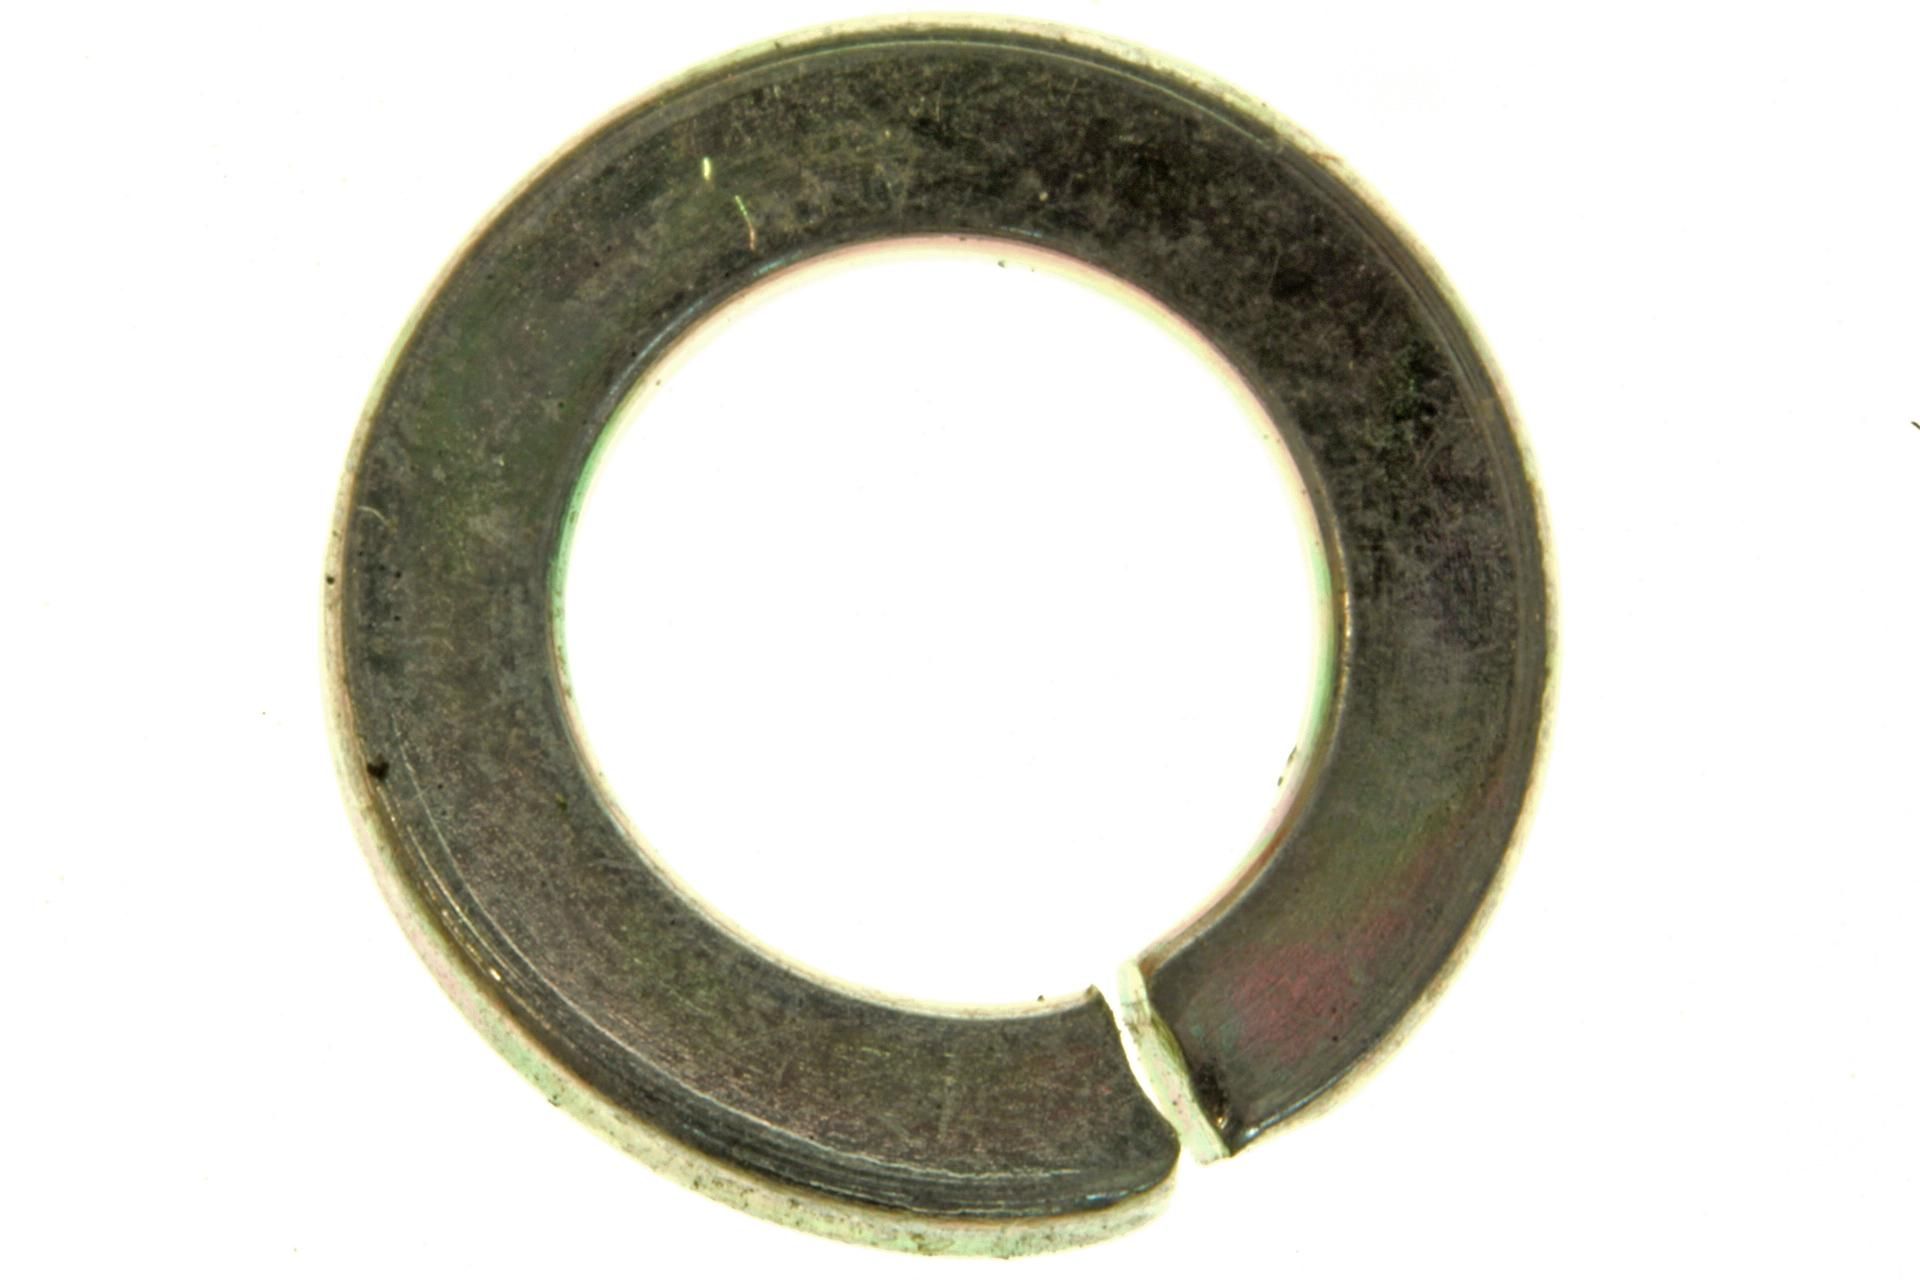 08321-01053 Superseded by 08321-0105A - WASHER,LOCK